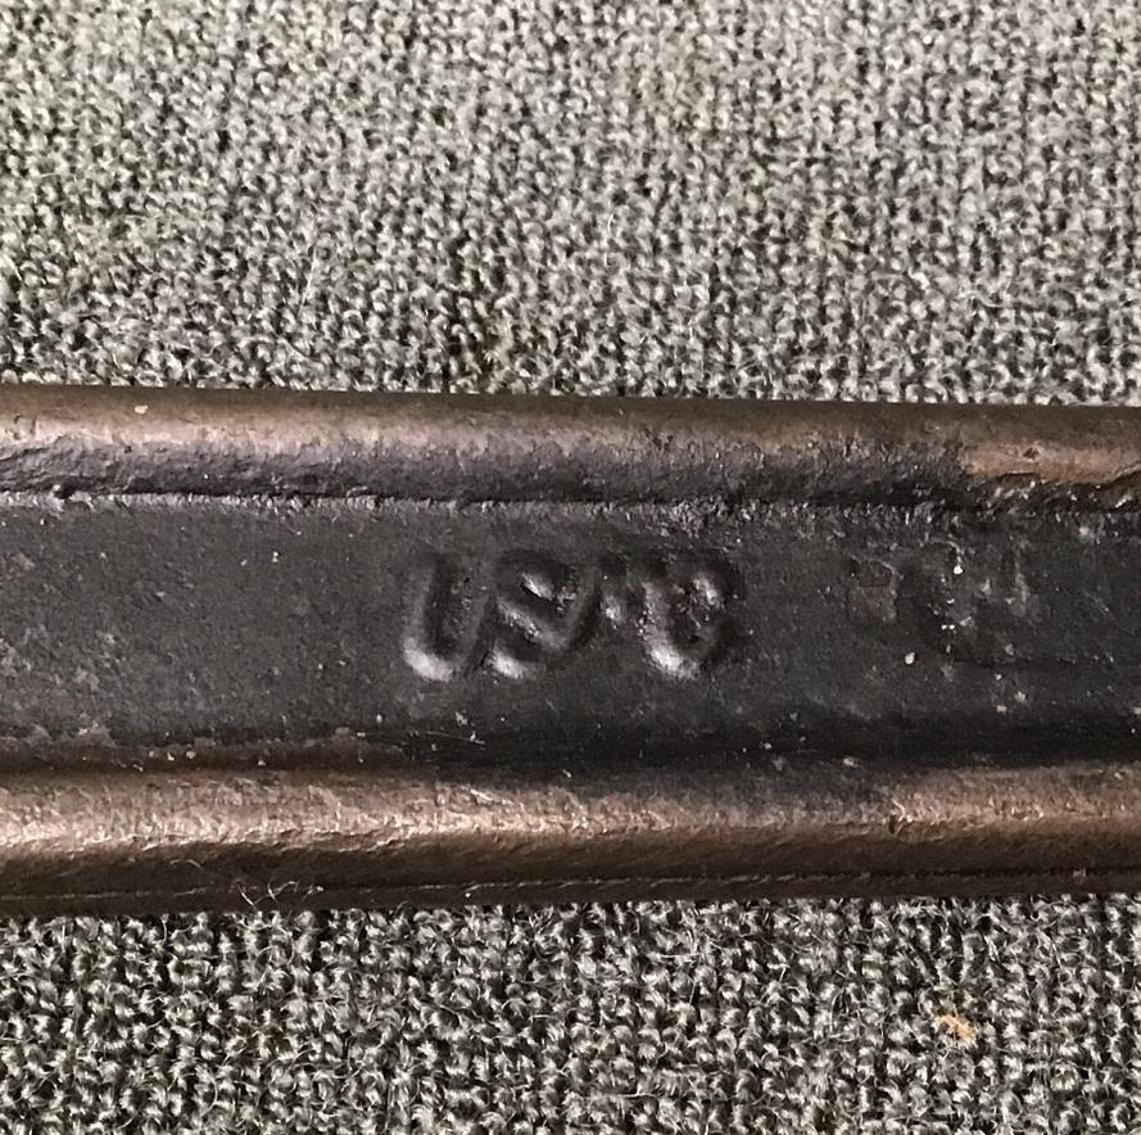 Image for Usmc Marked Open End Wrench